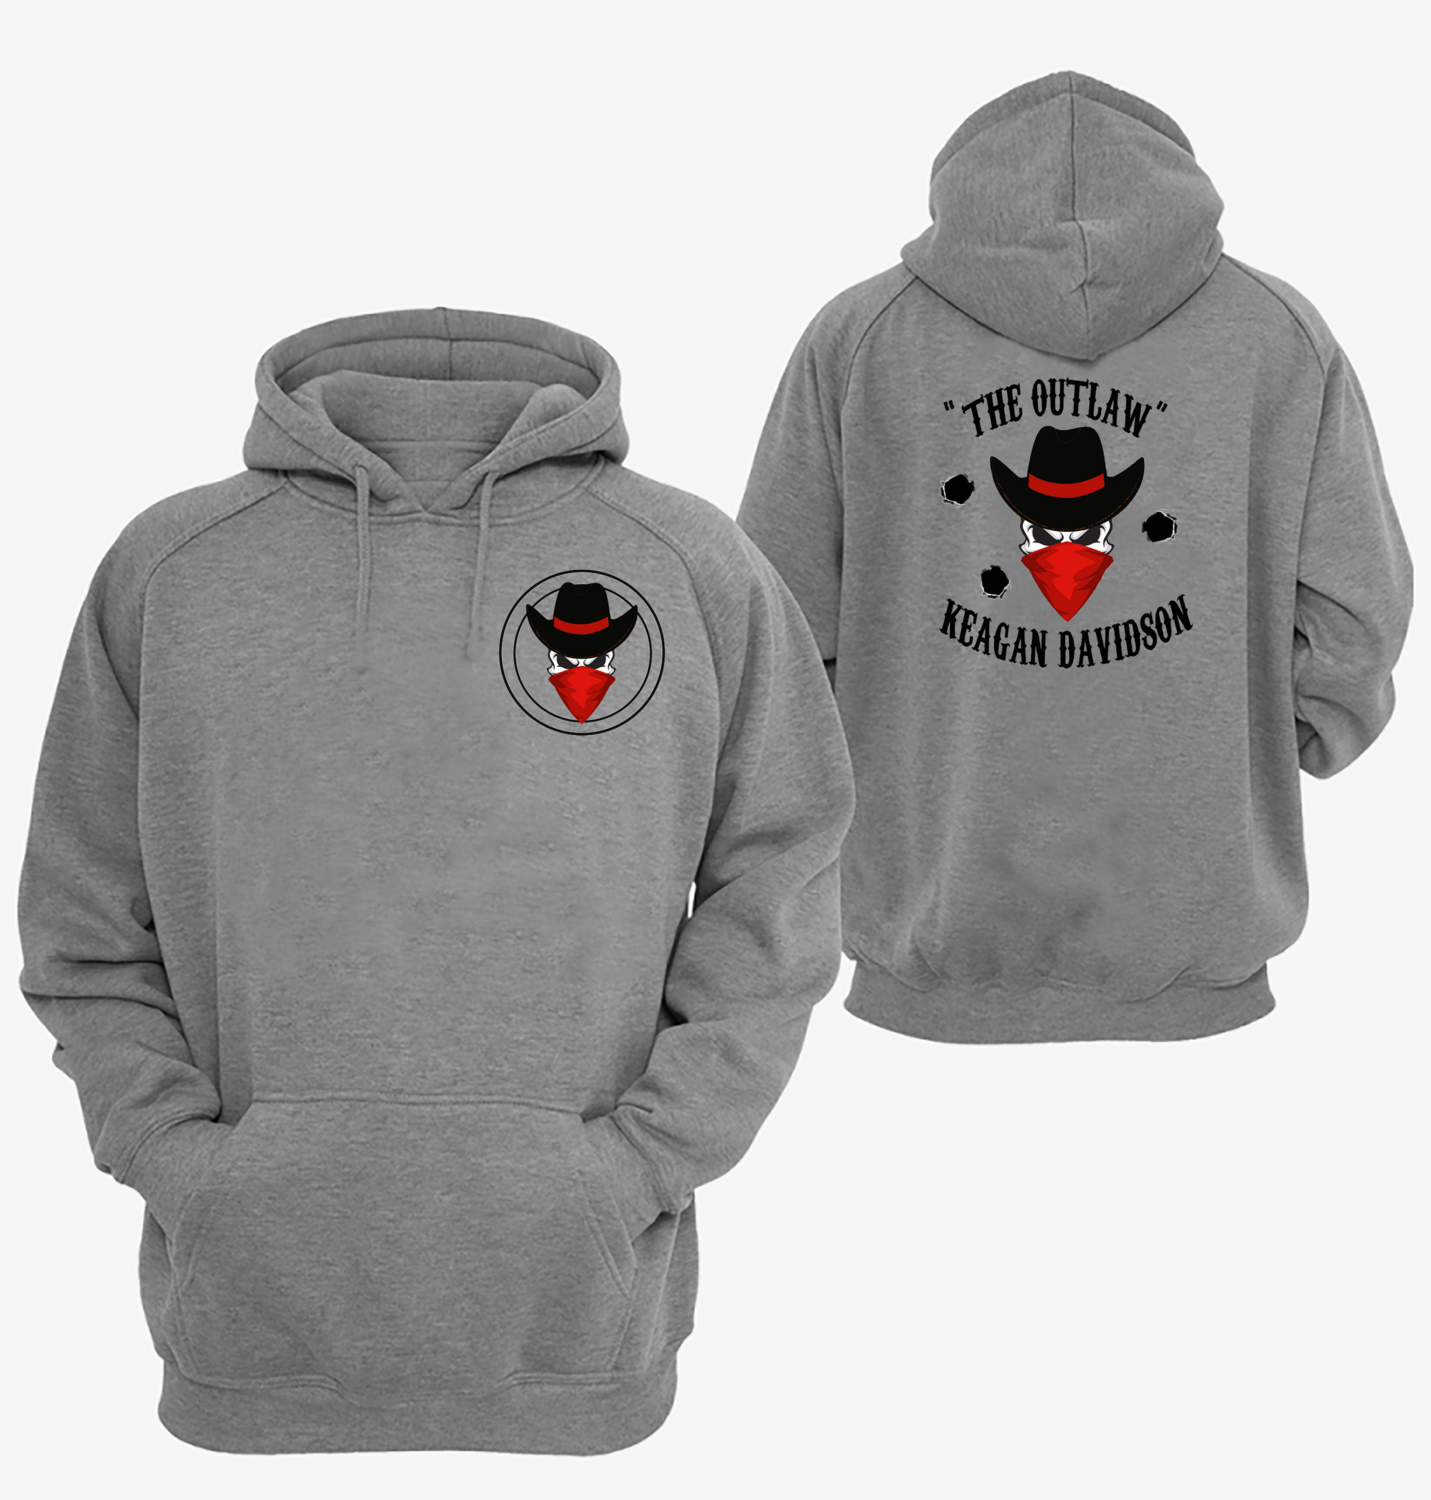 Keagan Davidson &quot;the Outlaw&quot; Fight Hoodie - PRE-ORDER